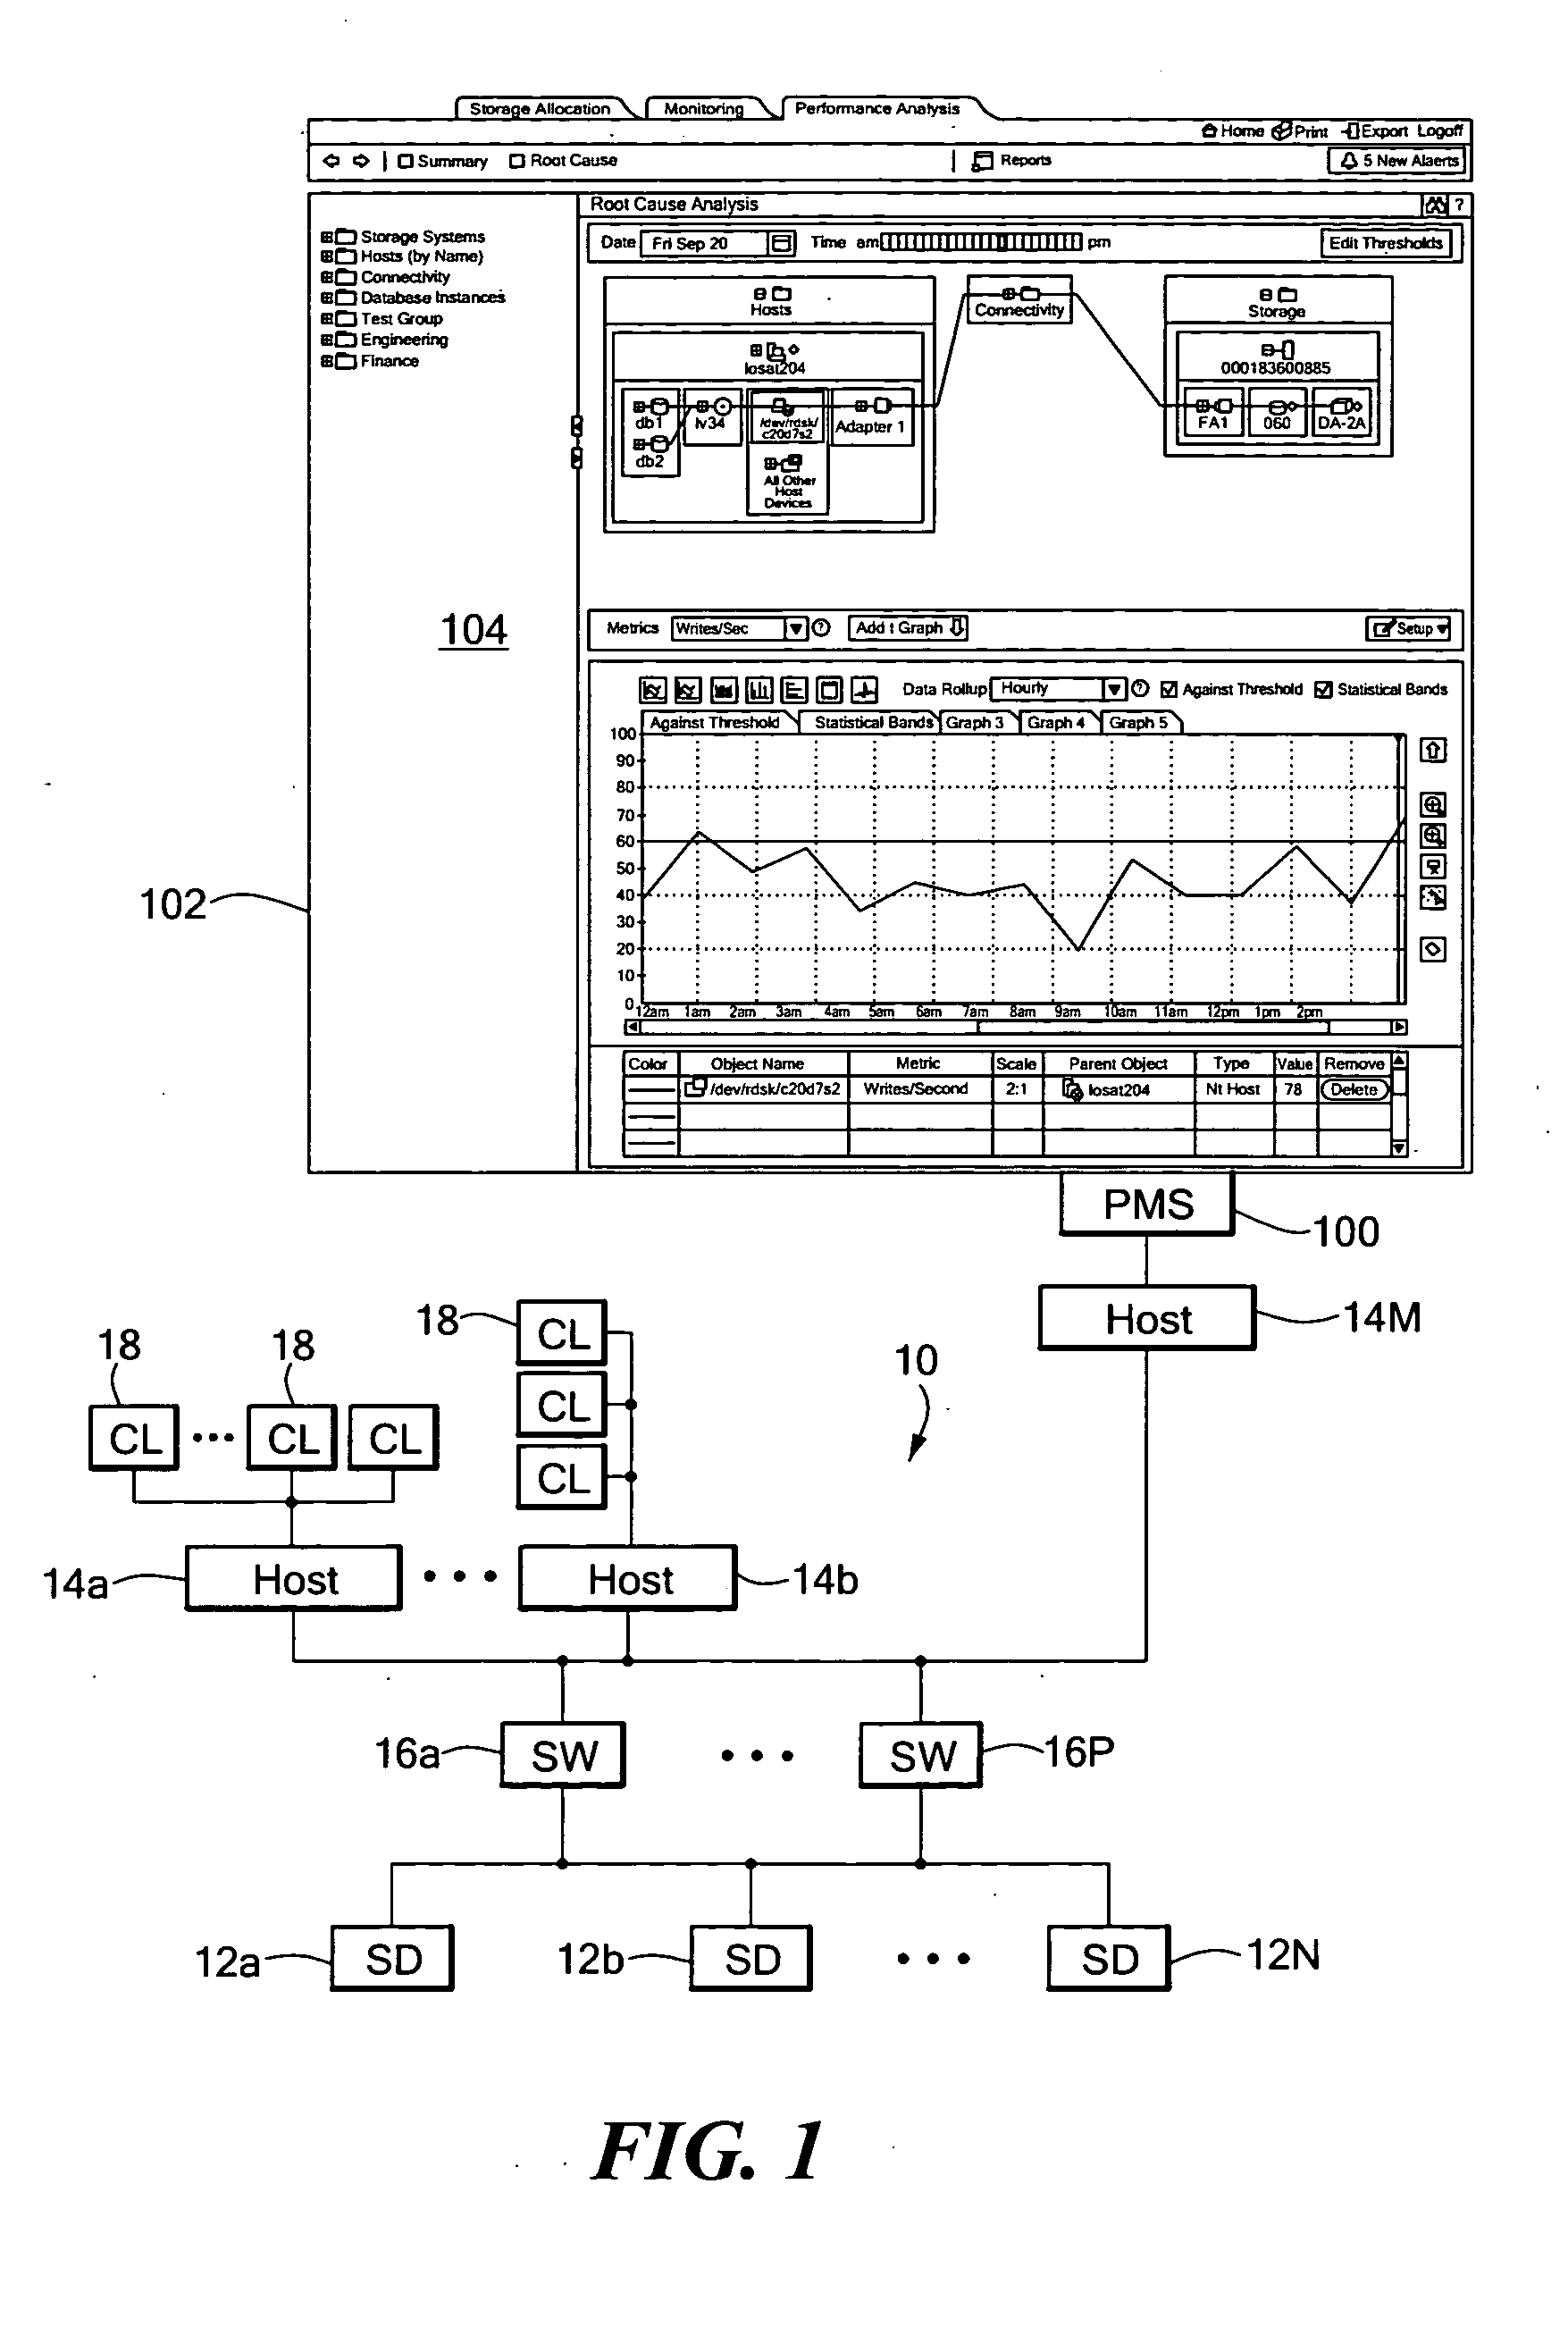 System and method providing network object performance information with threshold selection